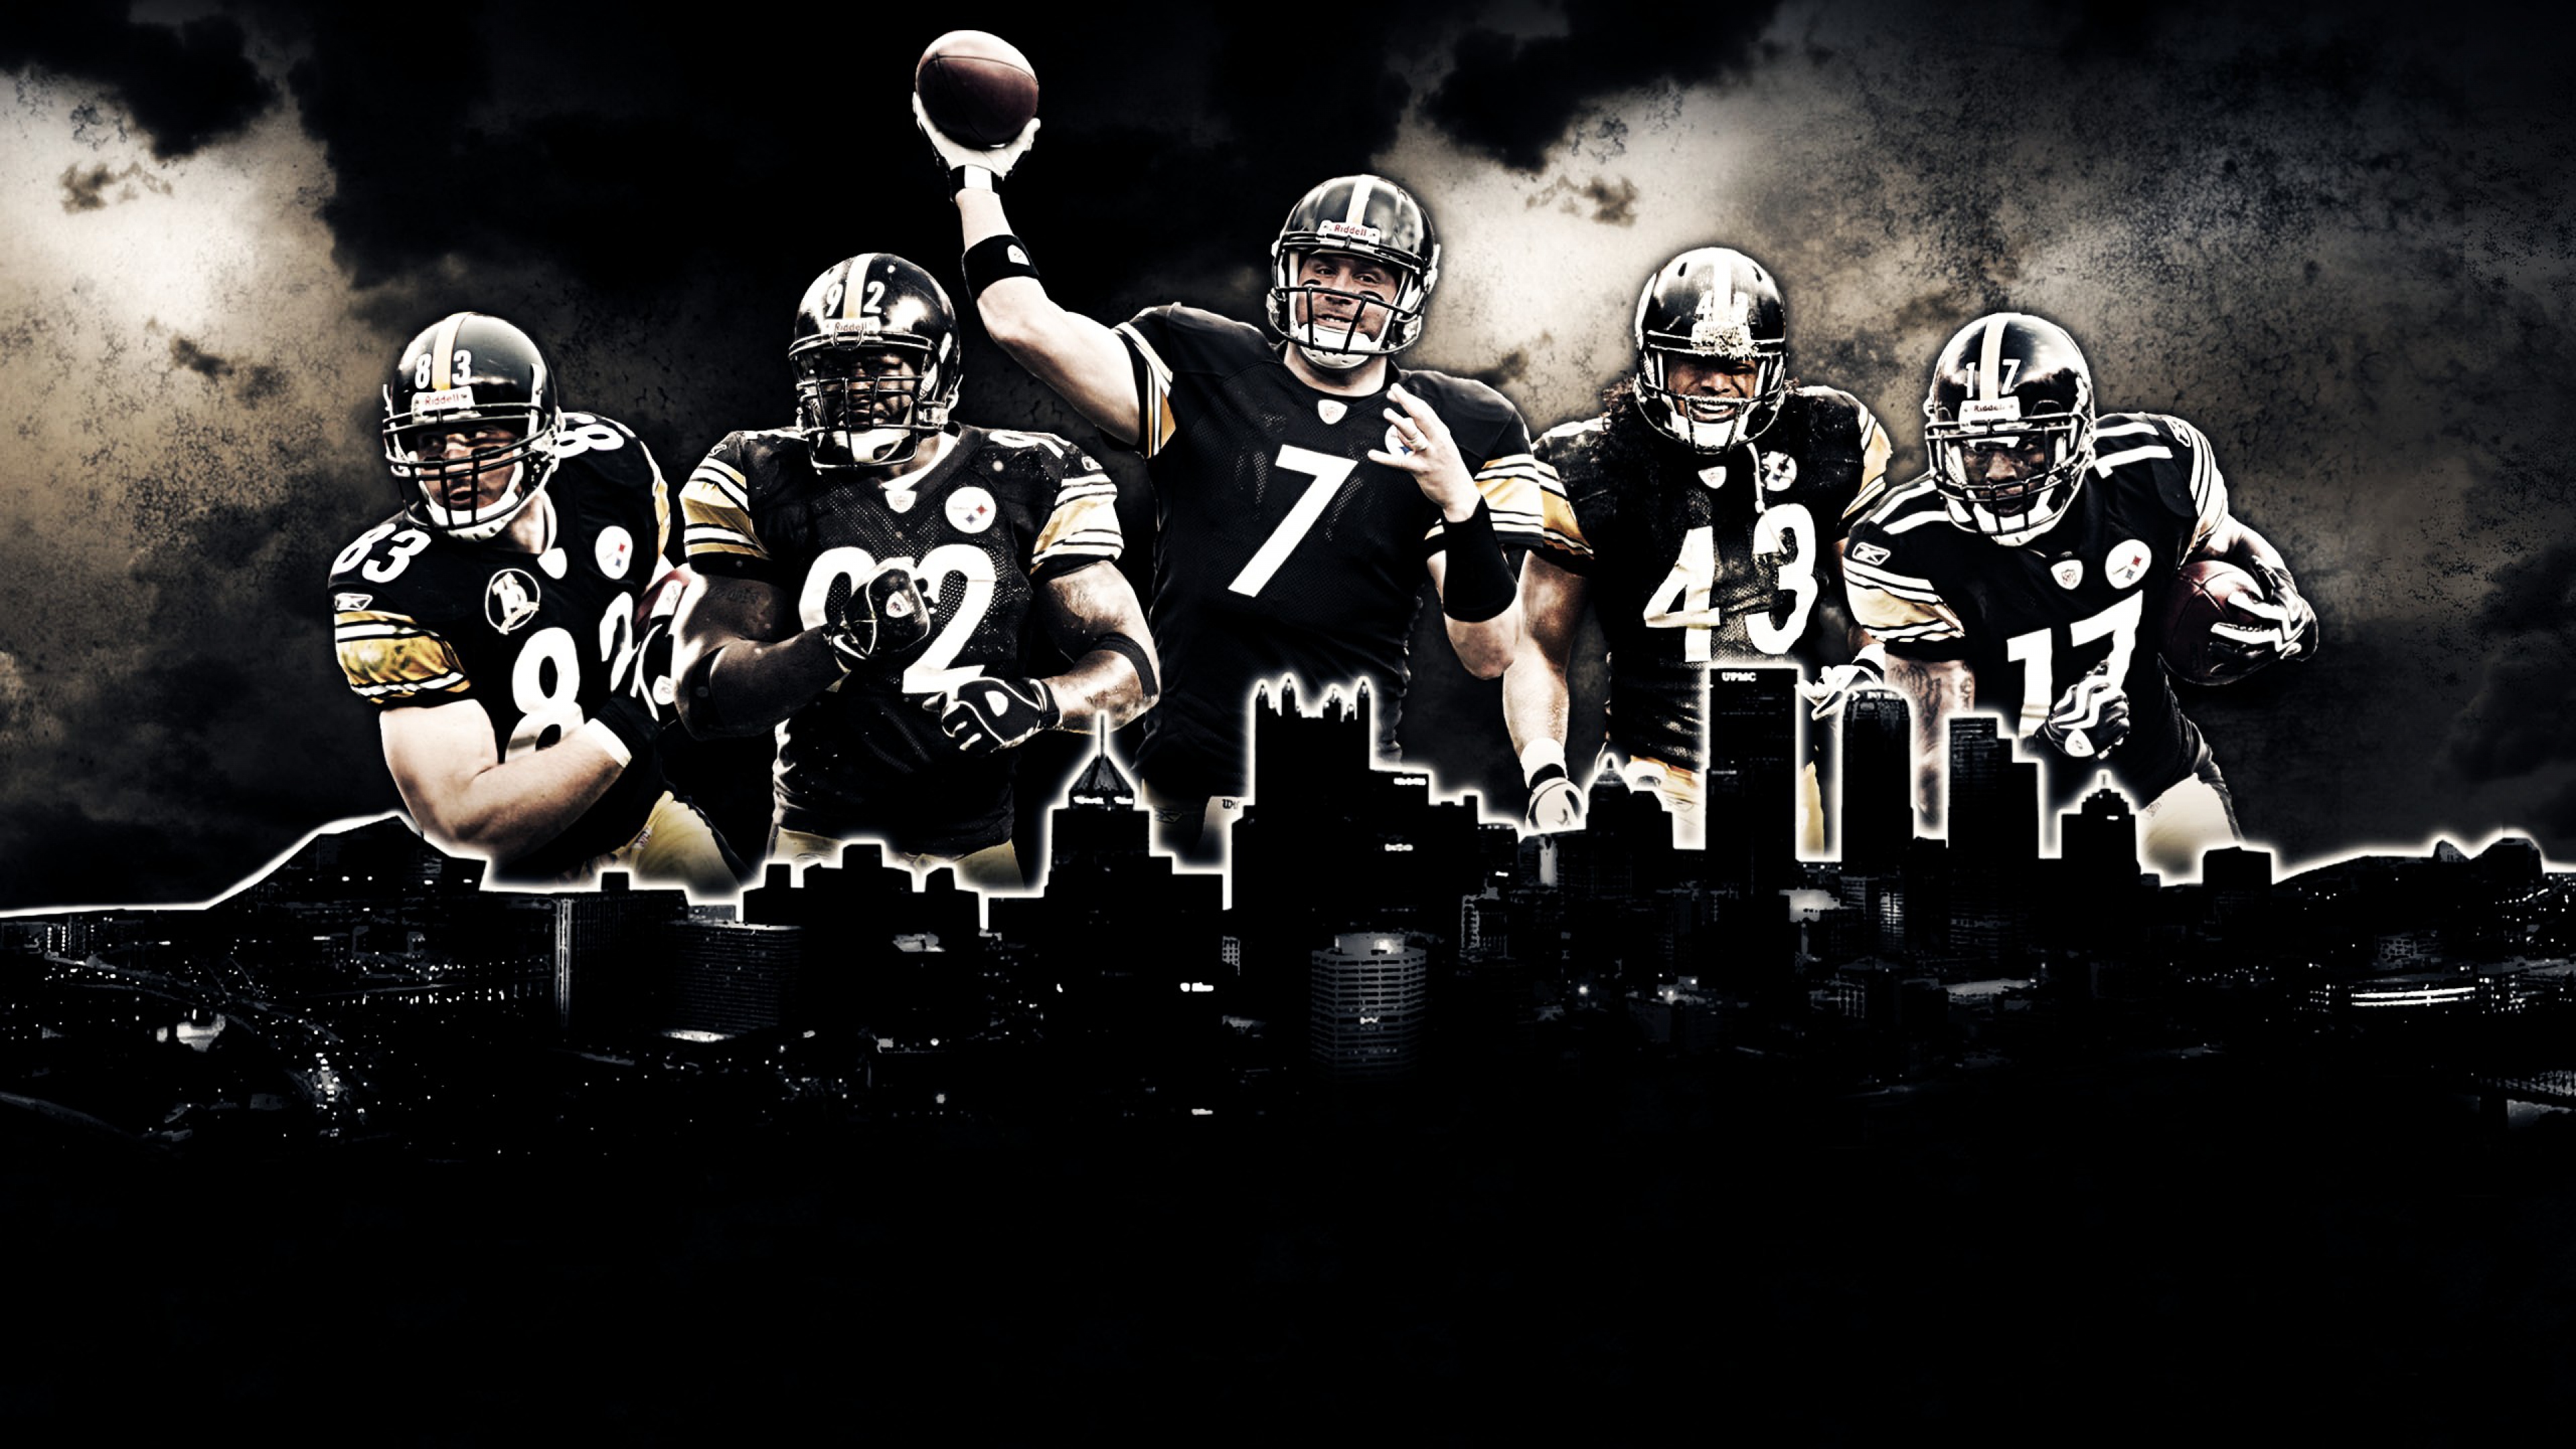 Cool Edited NFL Wallpapers - Wallpaper Cave